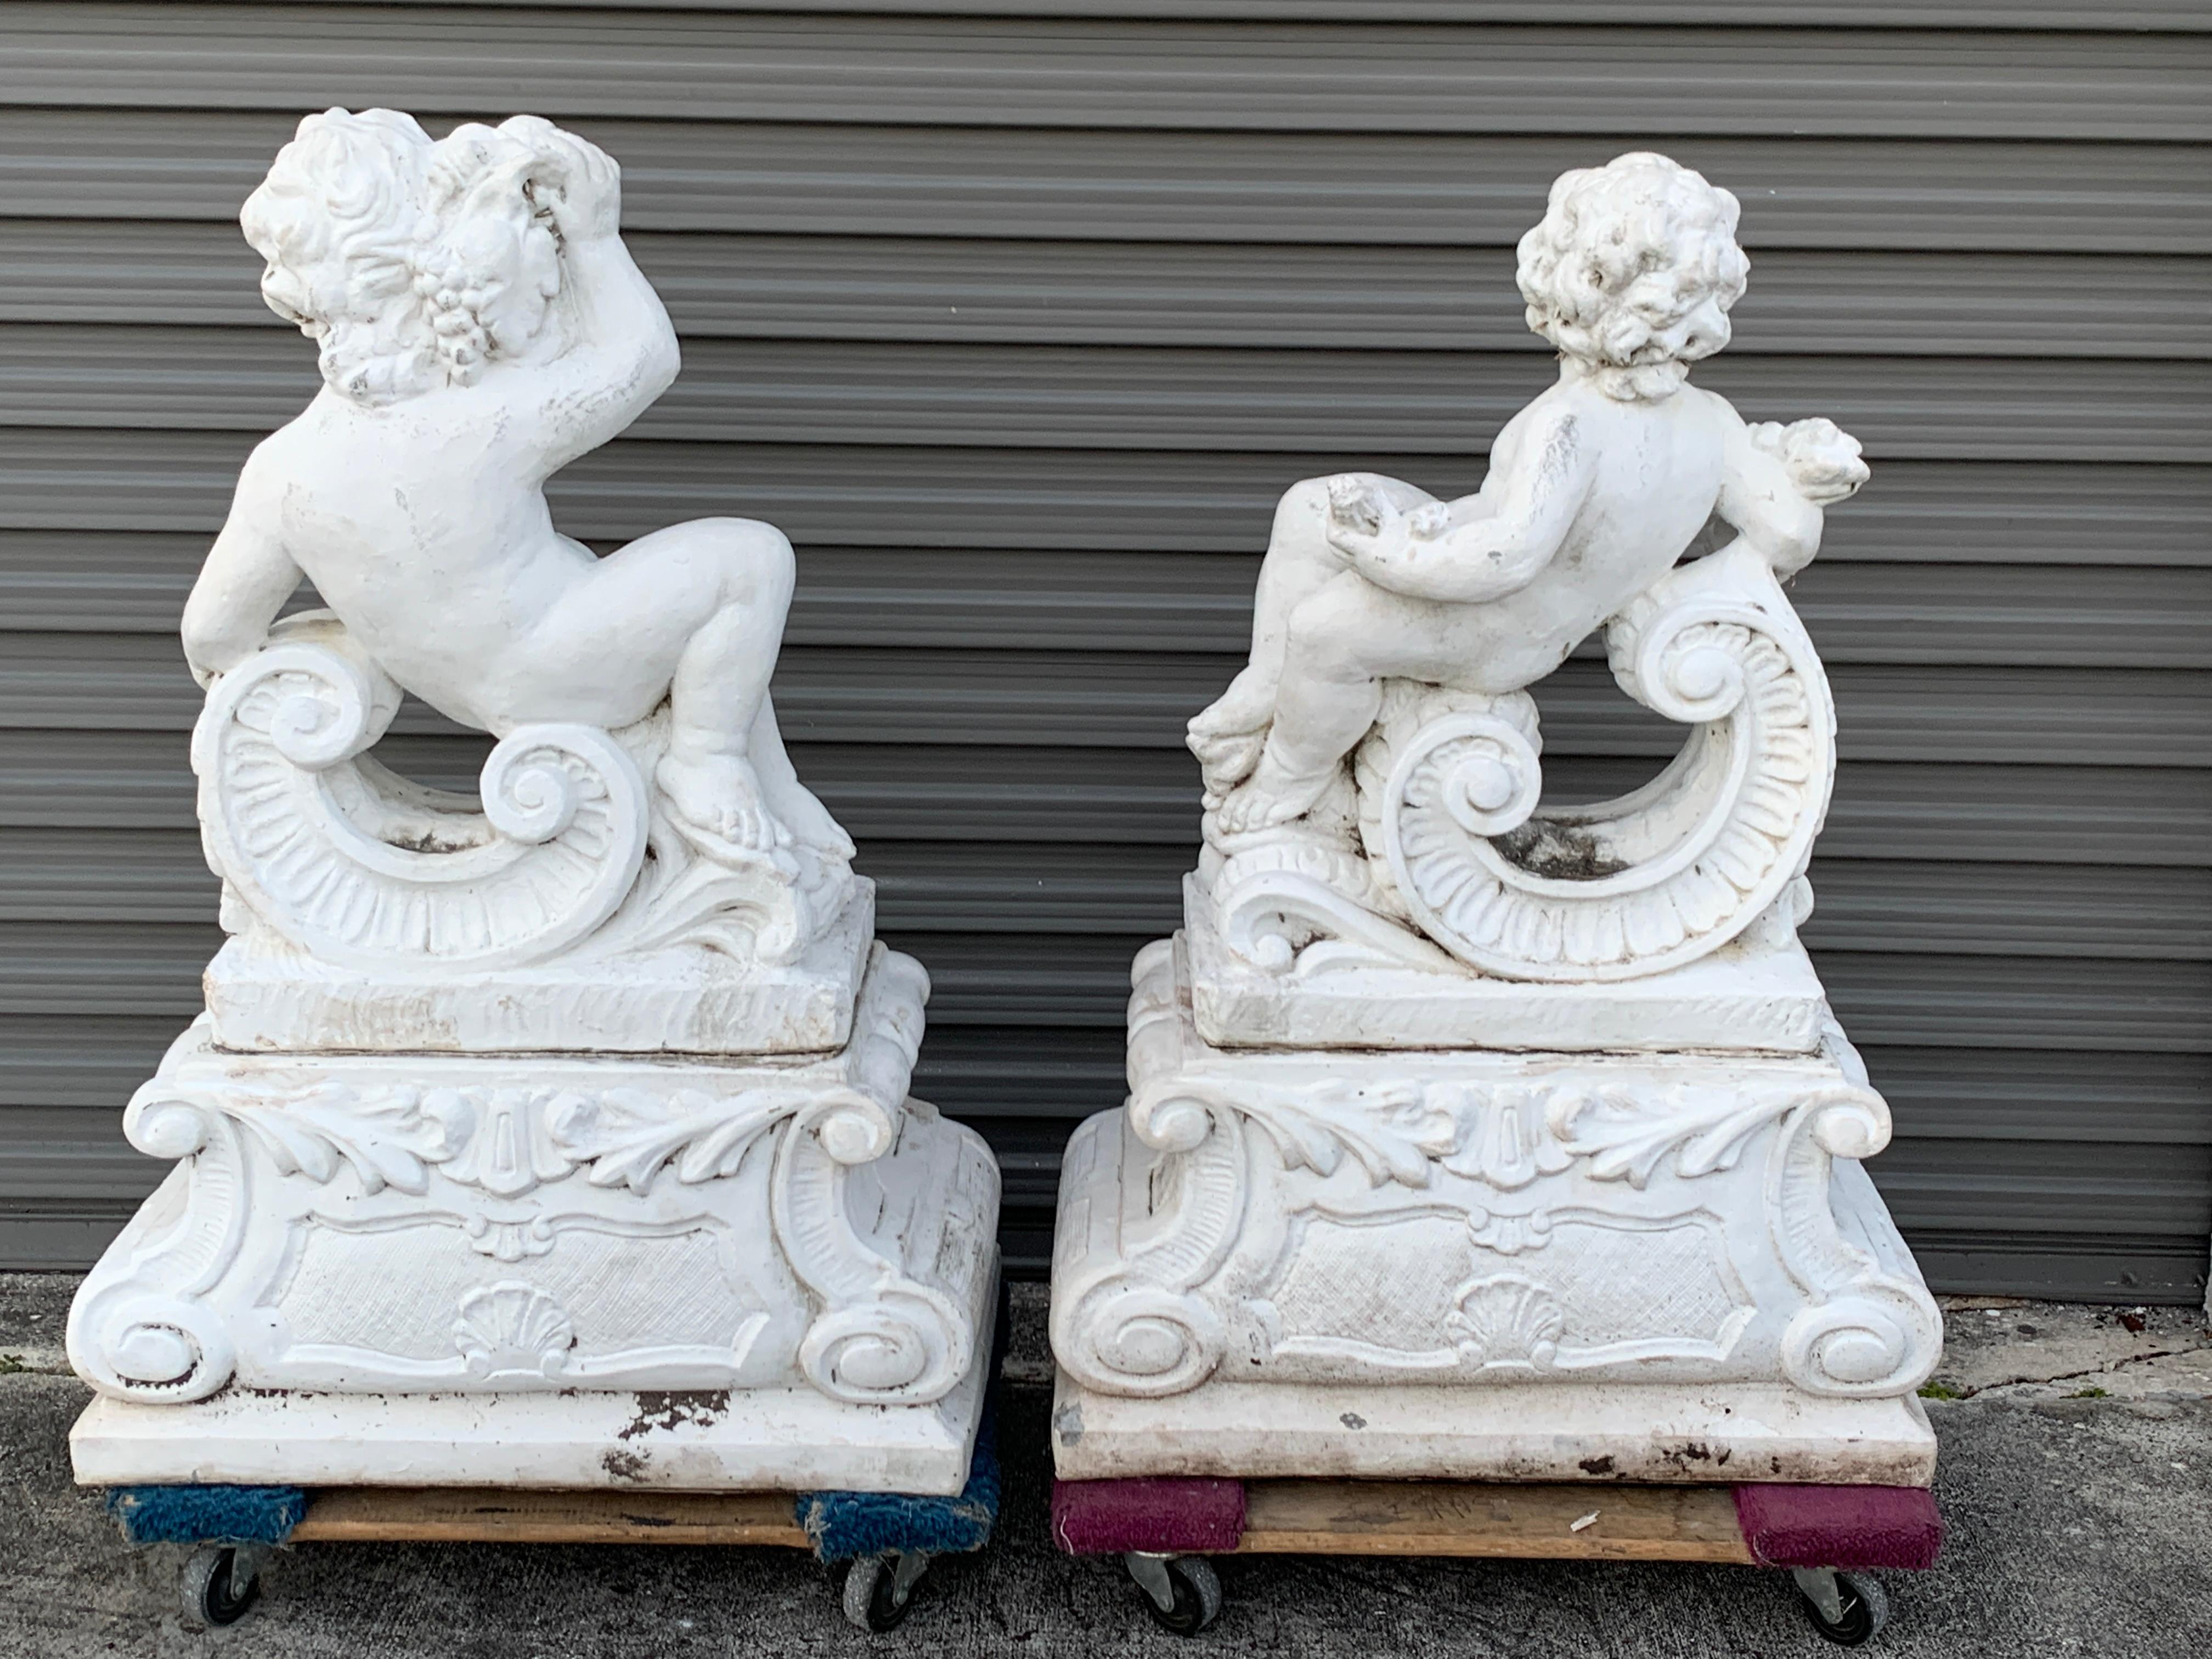 20th Century Pair of Vintage Cast Stone Statues of Recumbent Putti on Pedestal Bases